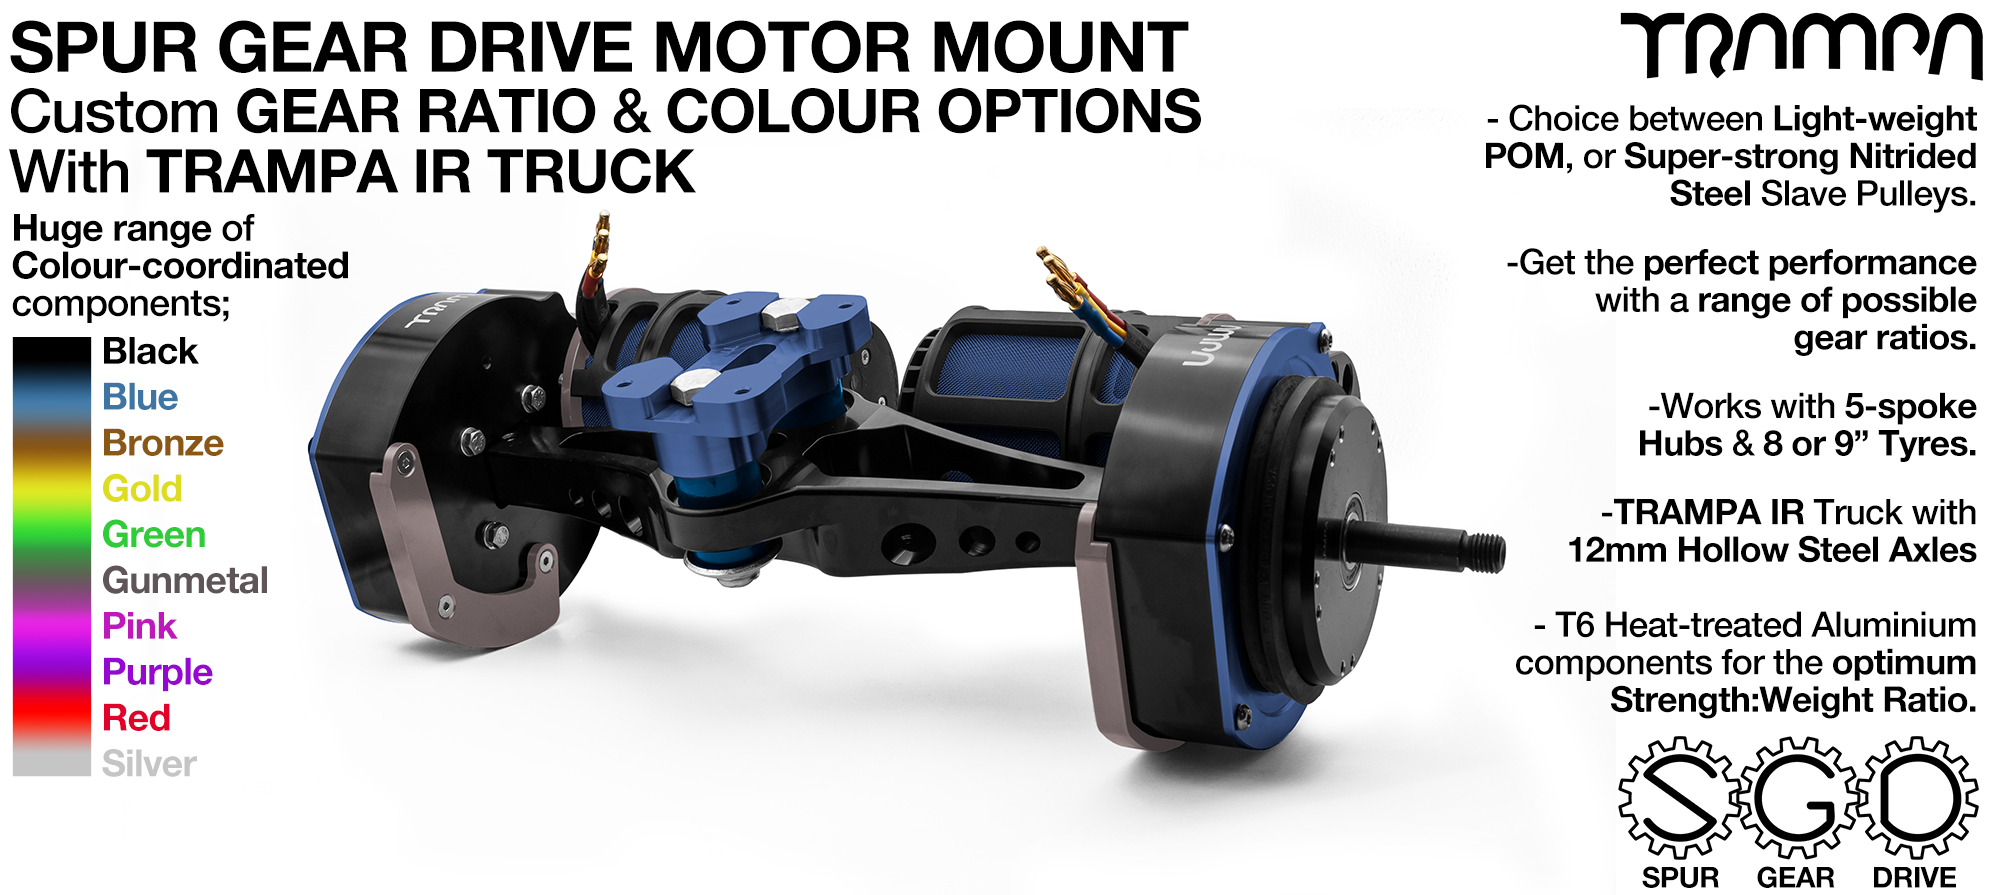 Mountainboard SGD TWIN with PULLEYS & FILTERS Mounted on a TRUCK